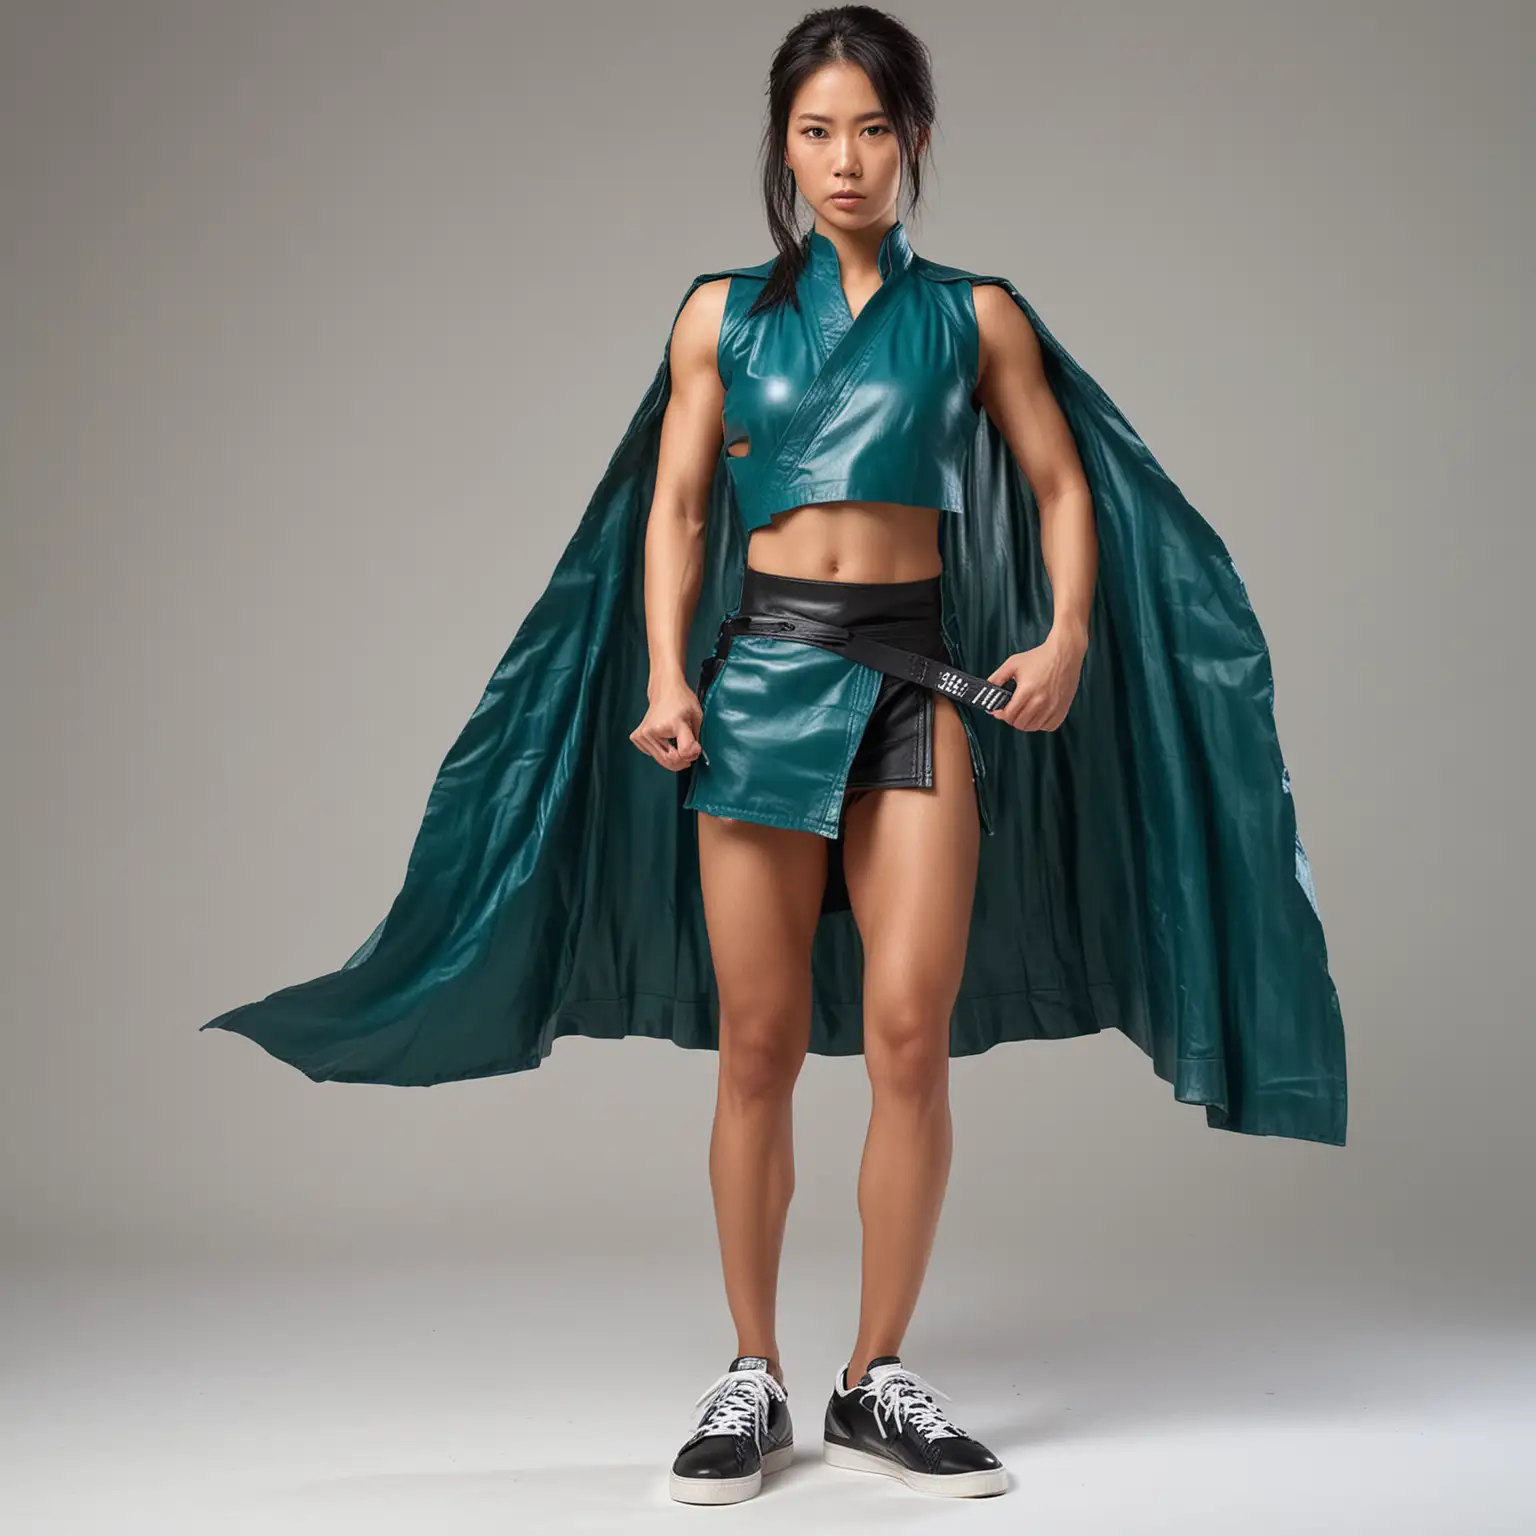 Strong Muscular Japanese Woman in Teal Leather Karate Gi and Cape on White Background